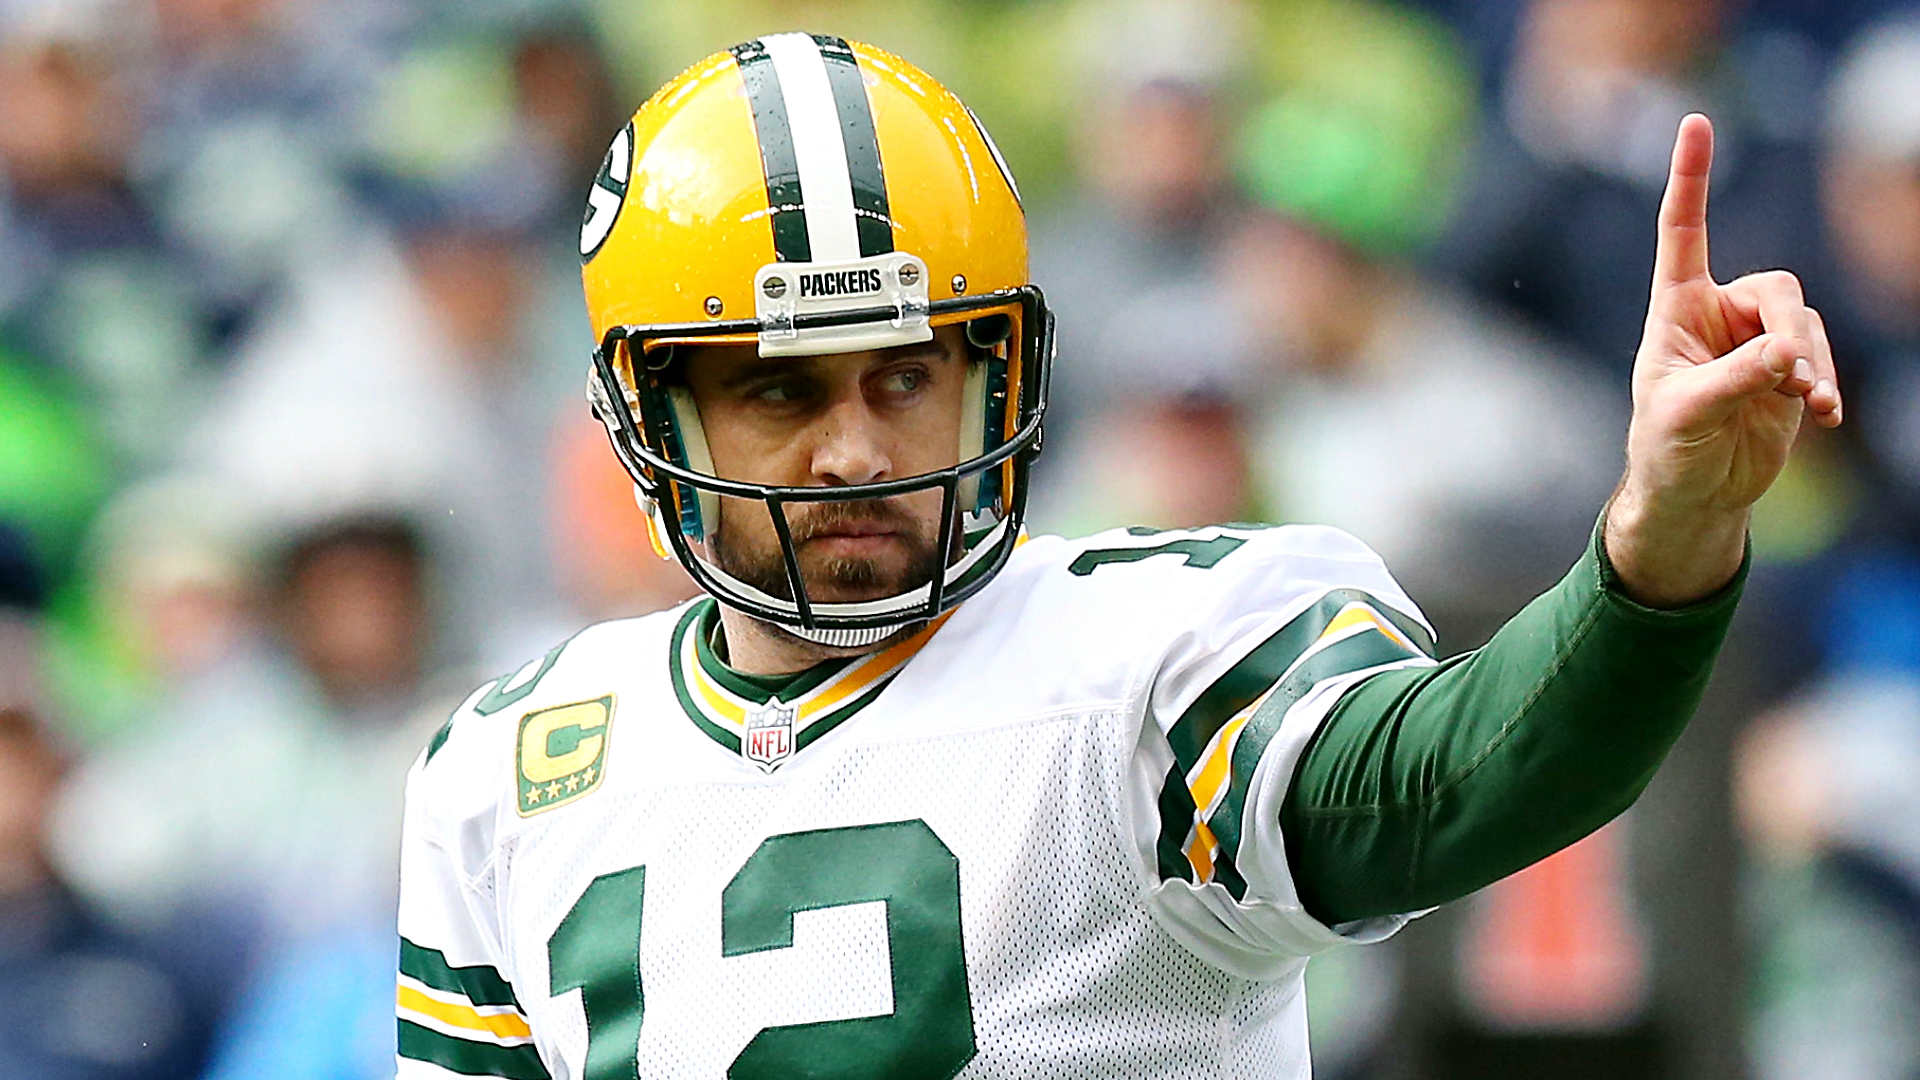 Aaron Rodgers Backgrounds, Compatible - PC, Mobile, Gadgets| 1920x1080 px